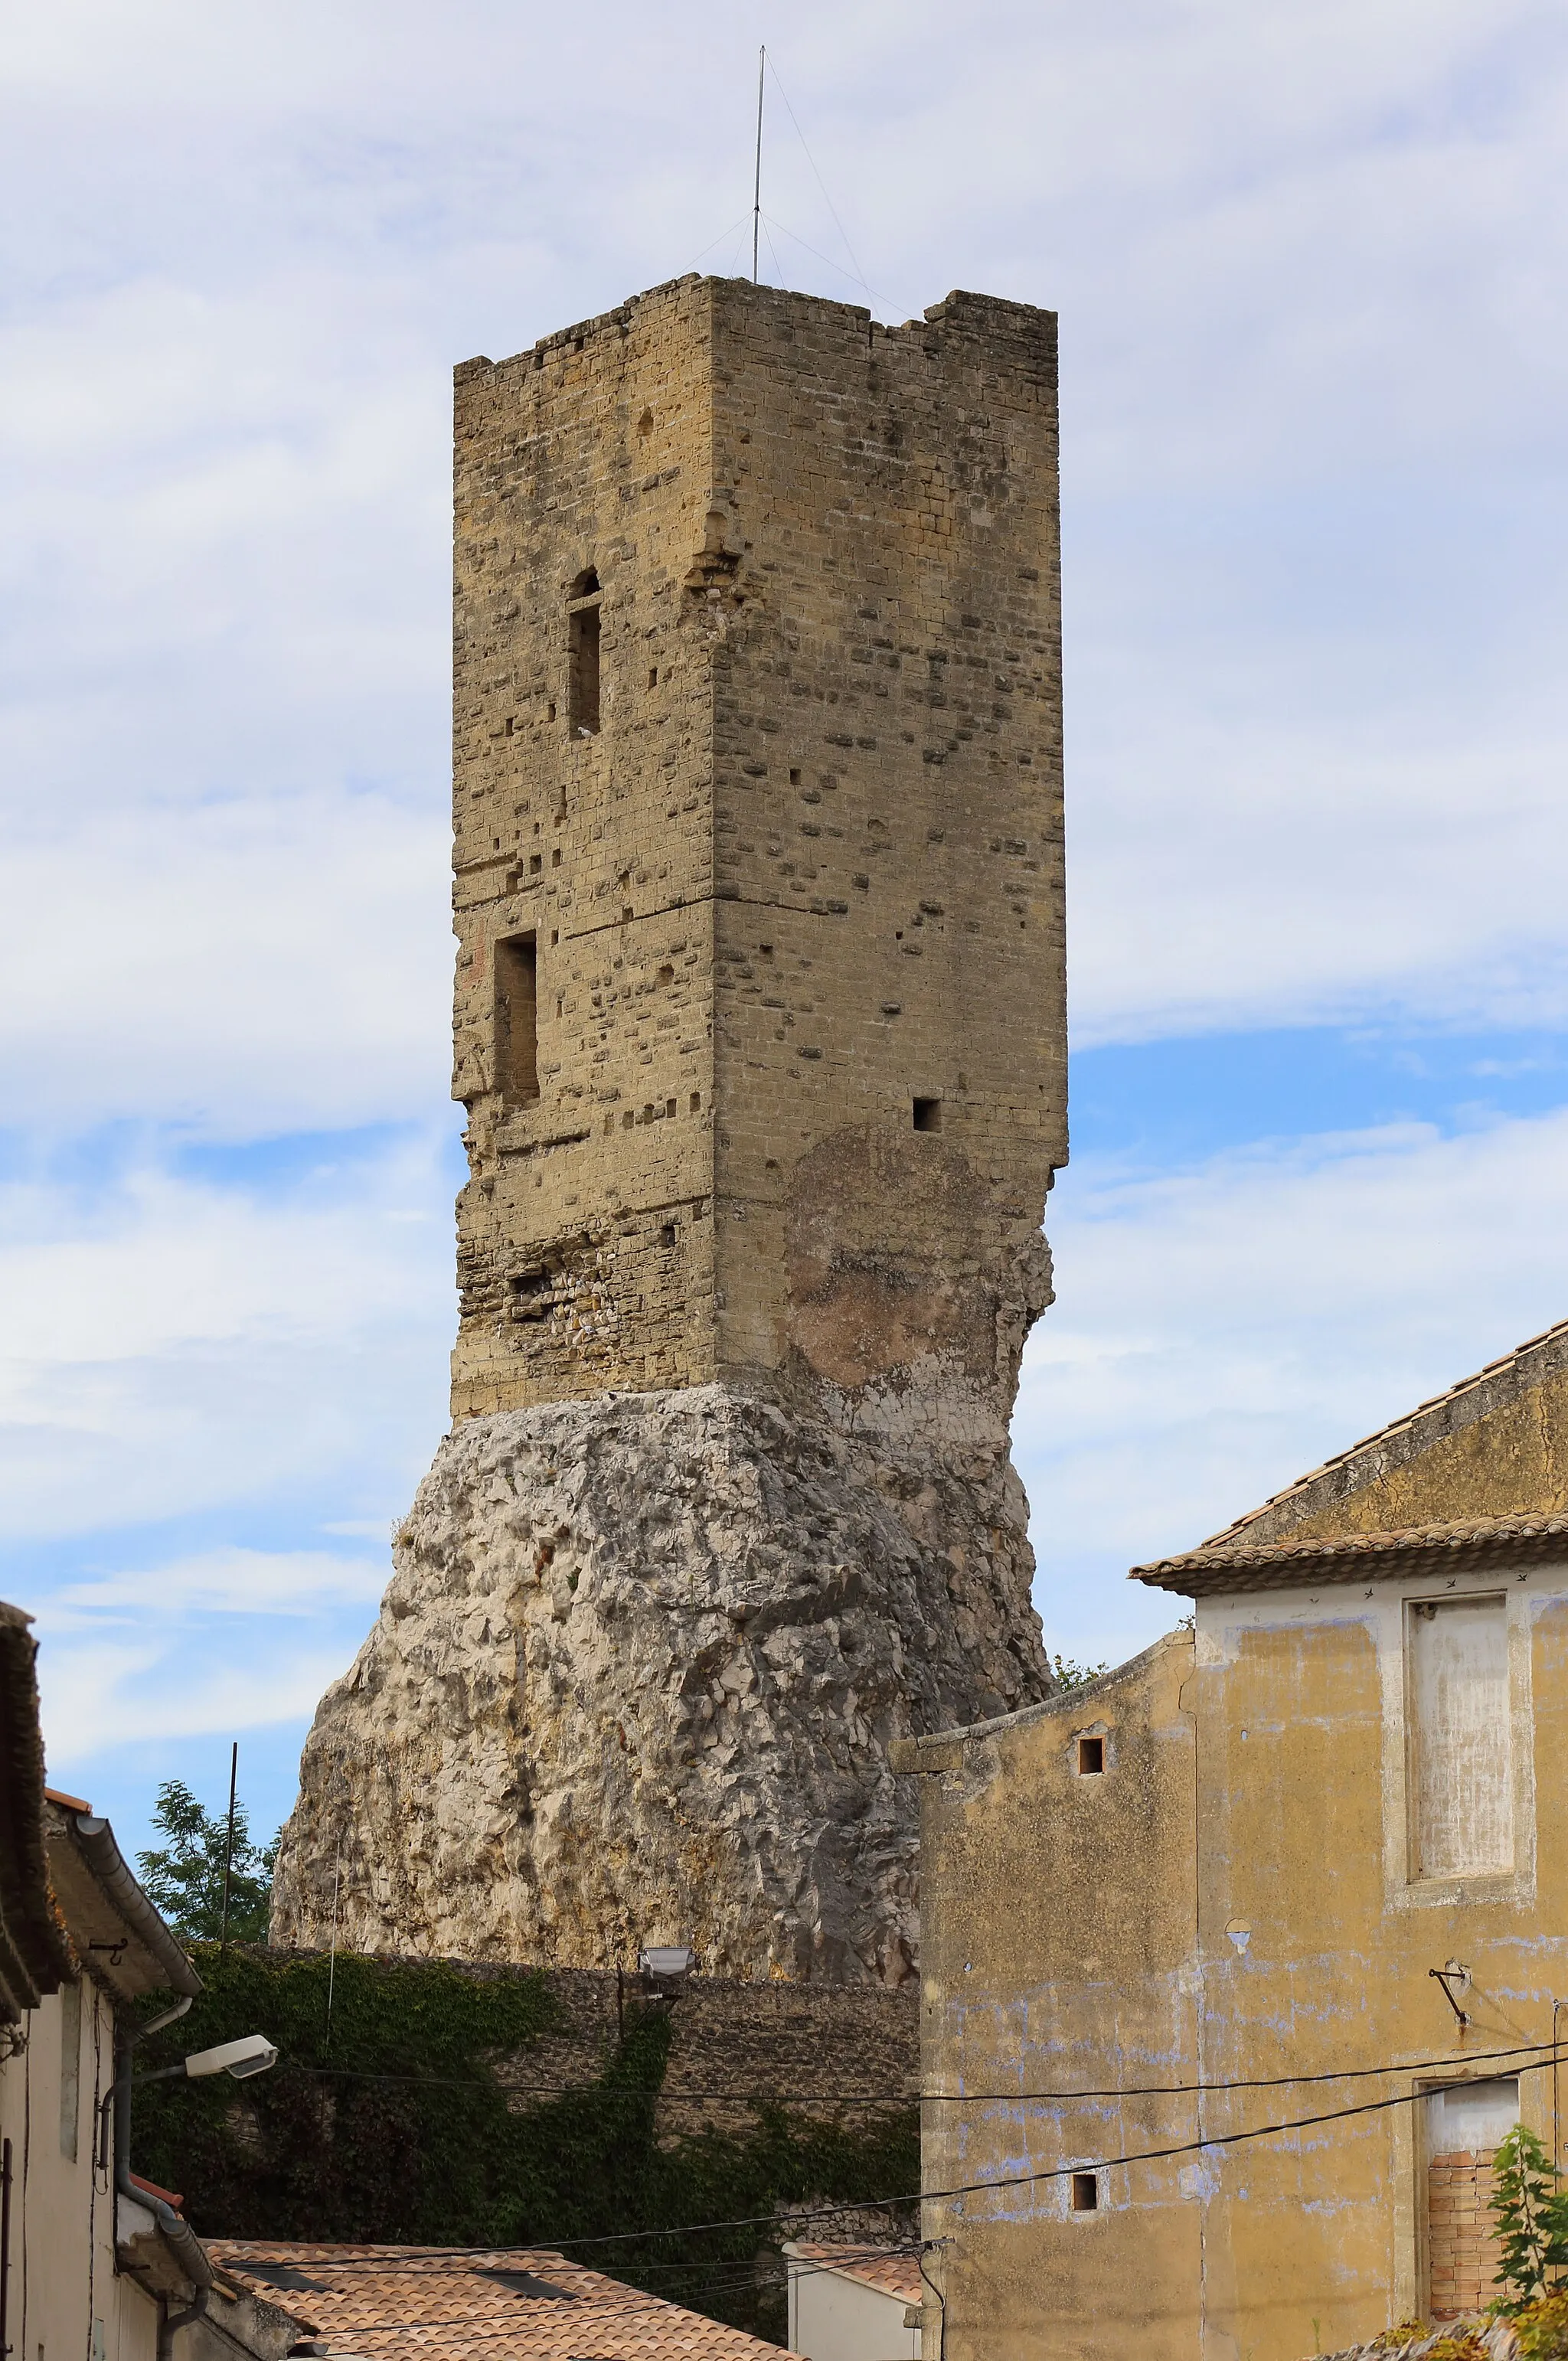 Photo showing: The ruins of the Square Tower (Tour carrée) in Roquemaure (Gard). The tower dates from the 12th century and formed part of the medieval castle.